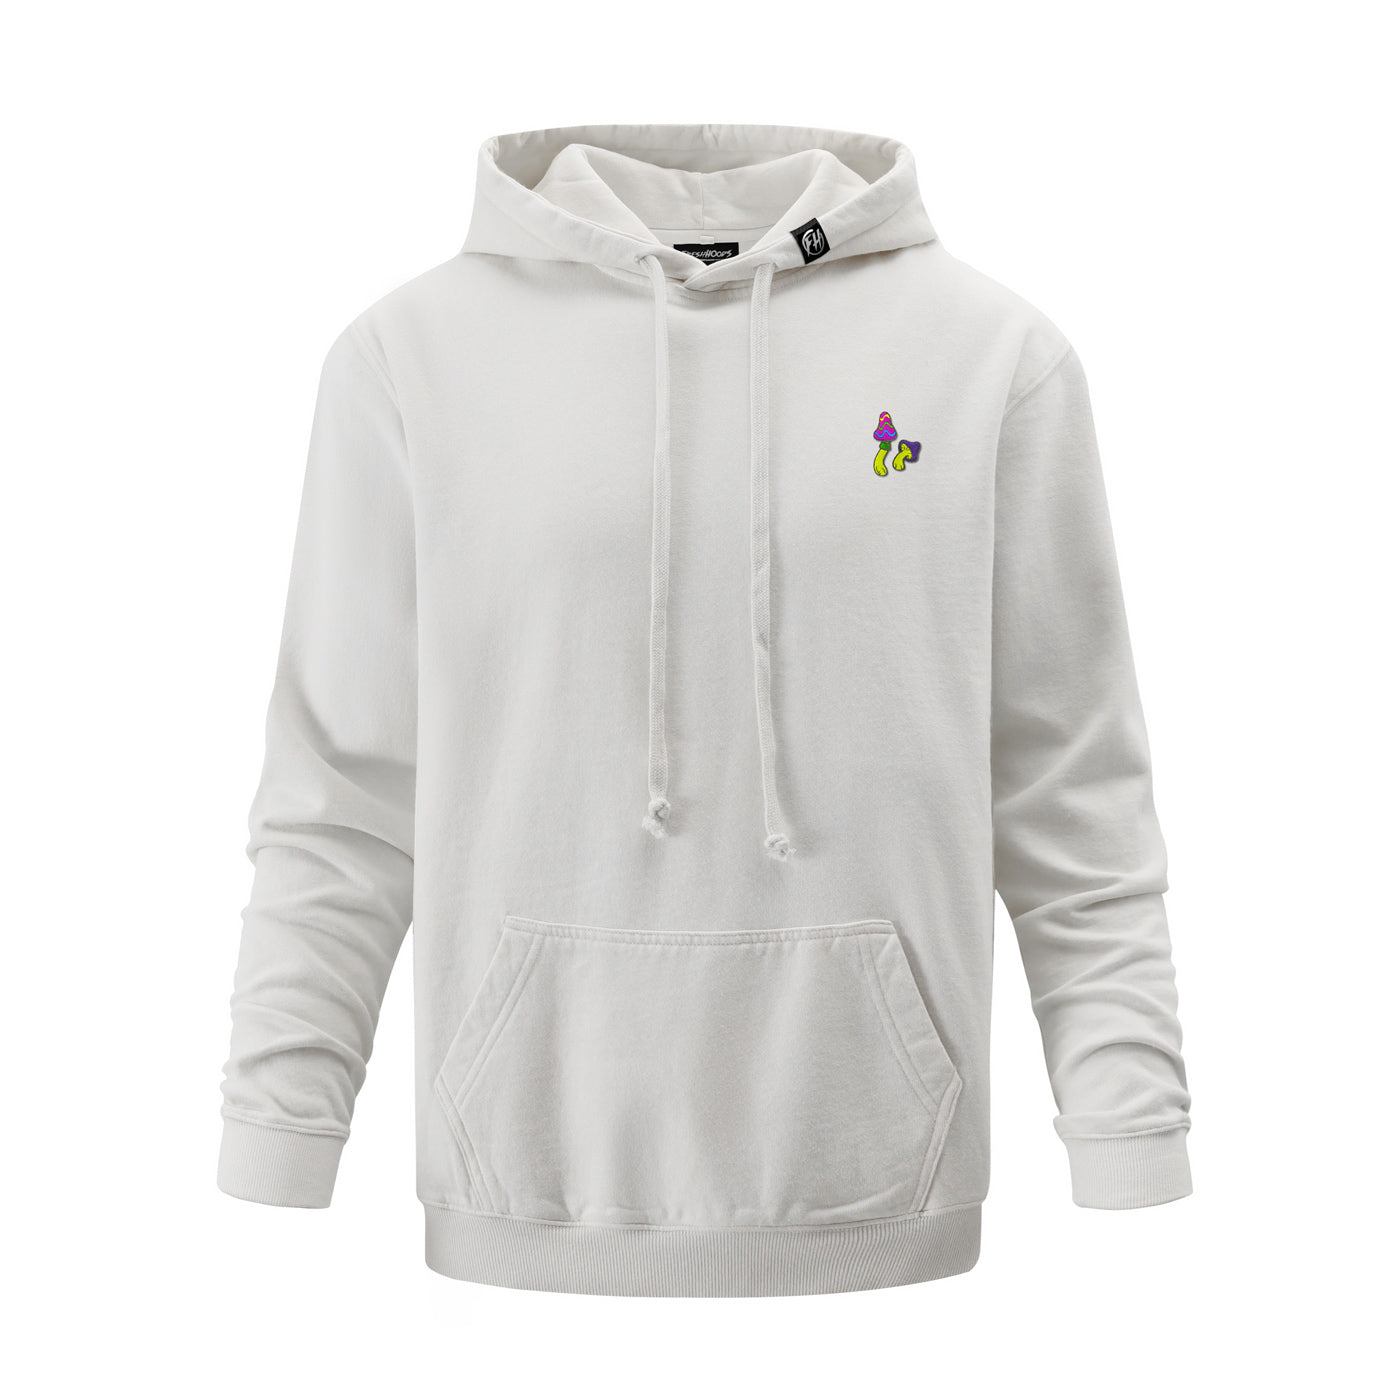 Trippy Shrooms Embroidered Hoodie